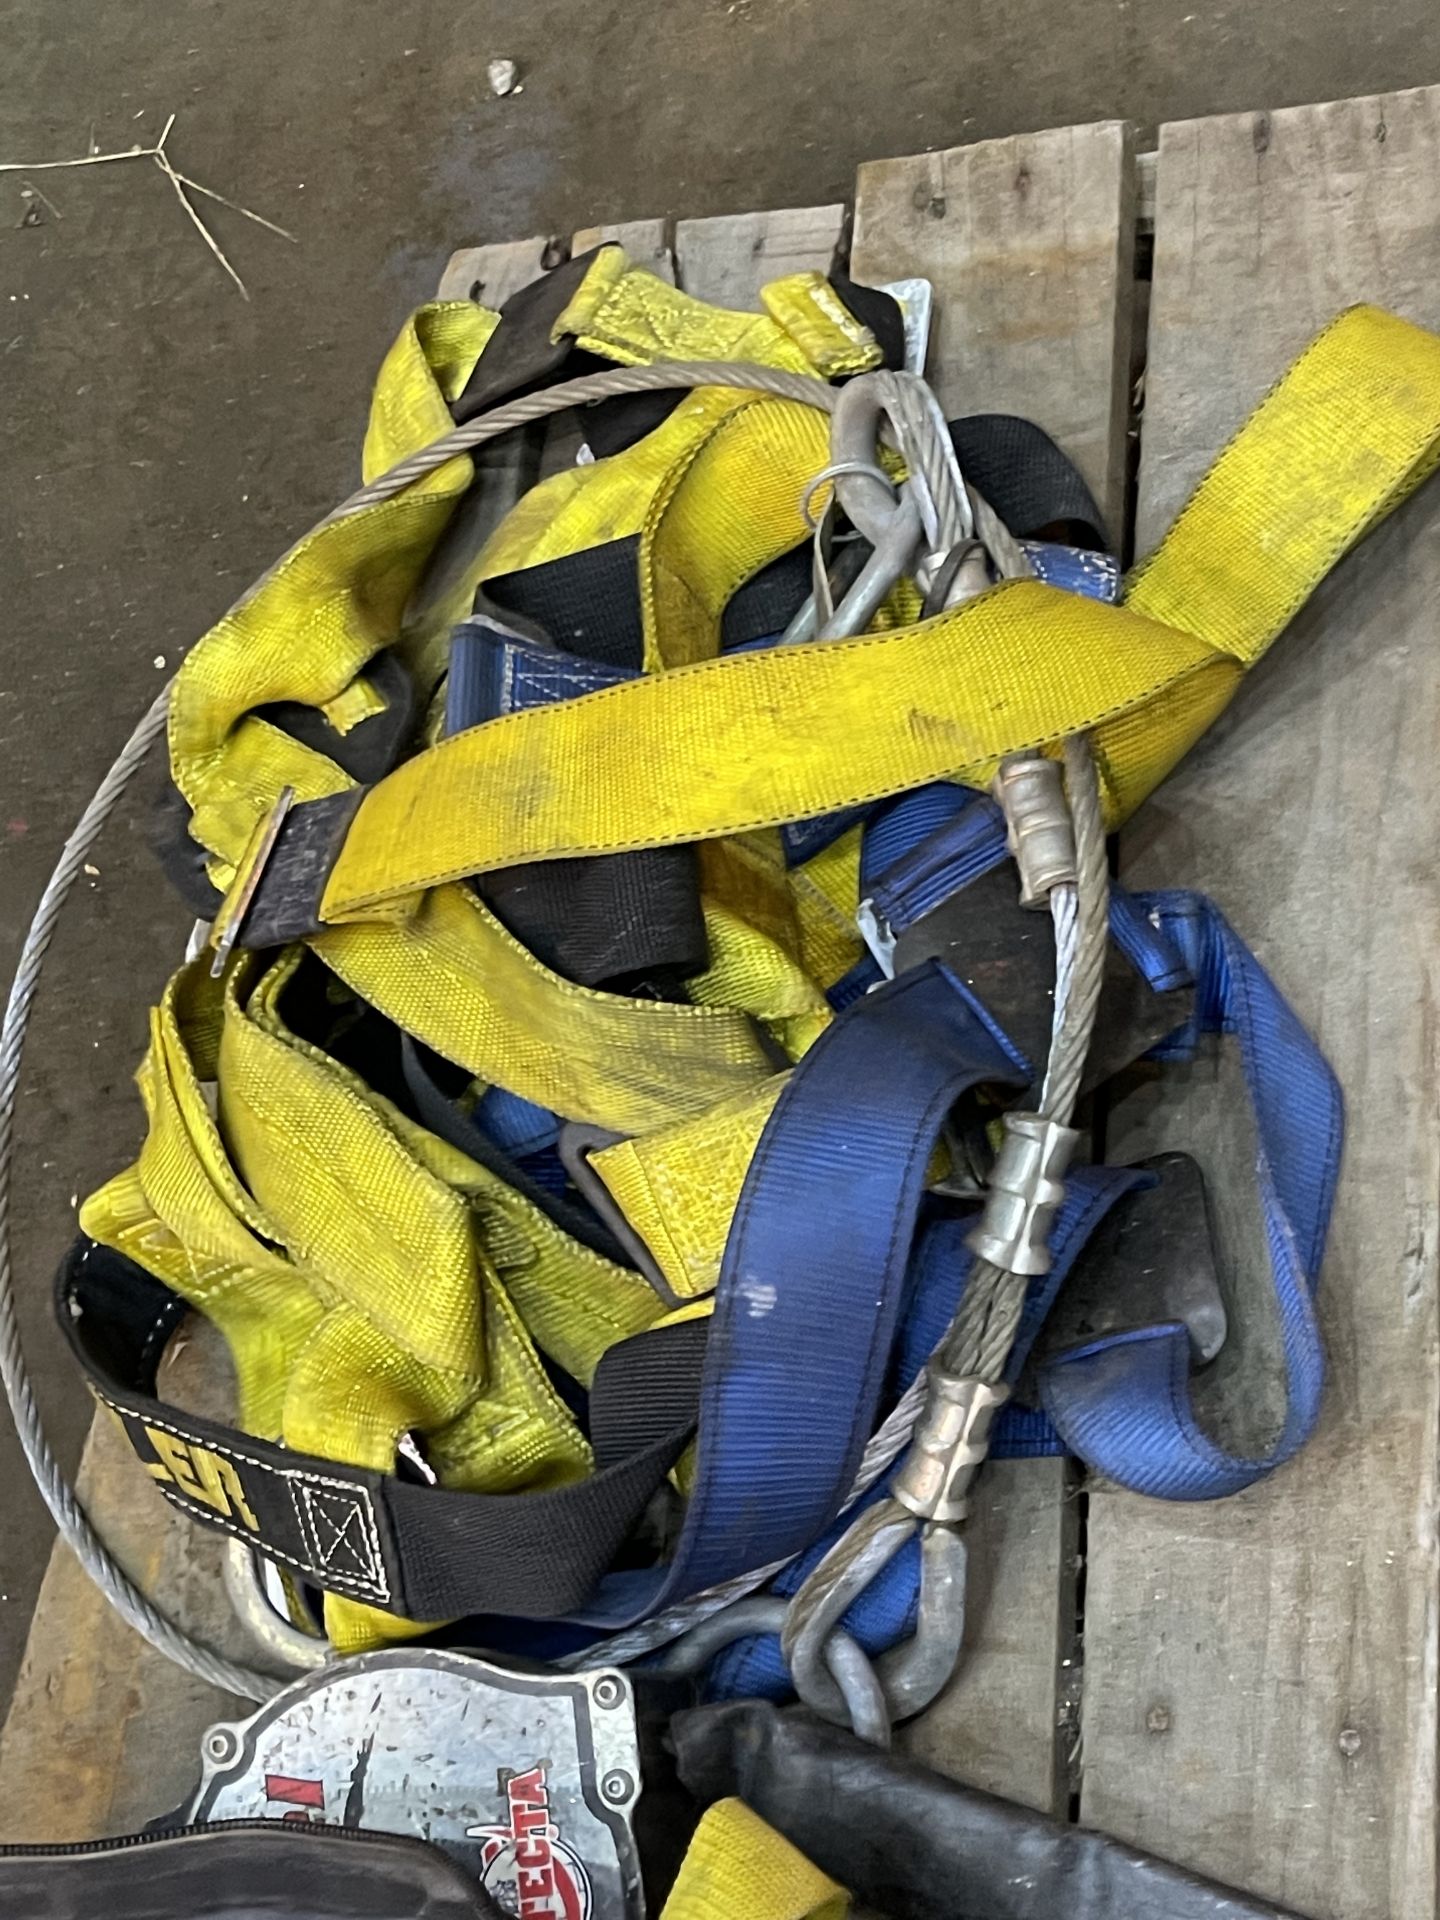 Lot of Lifeline Lanyard Safety Harness (DR42) - Image 16 of 22